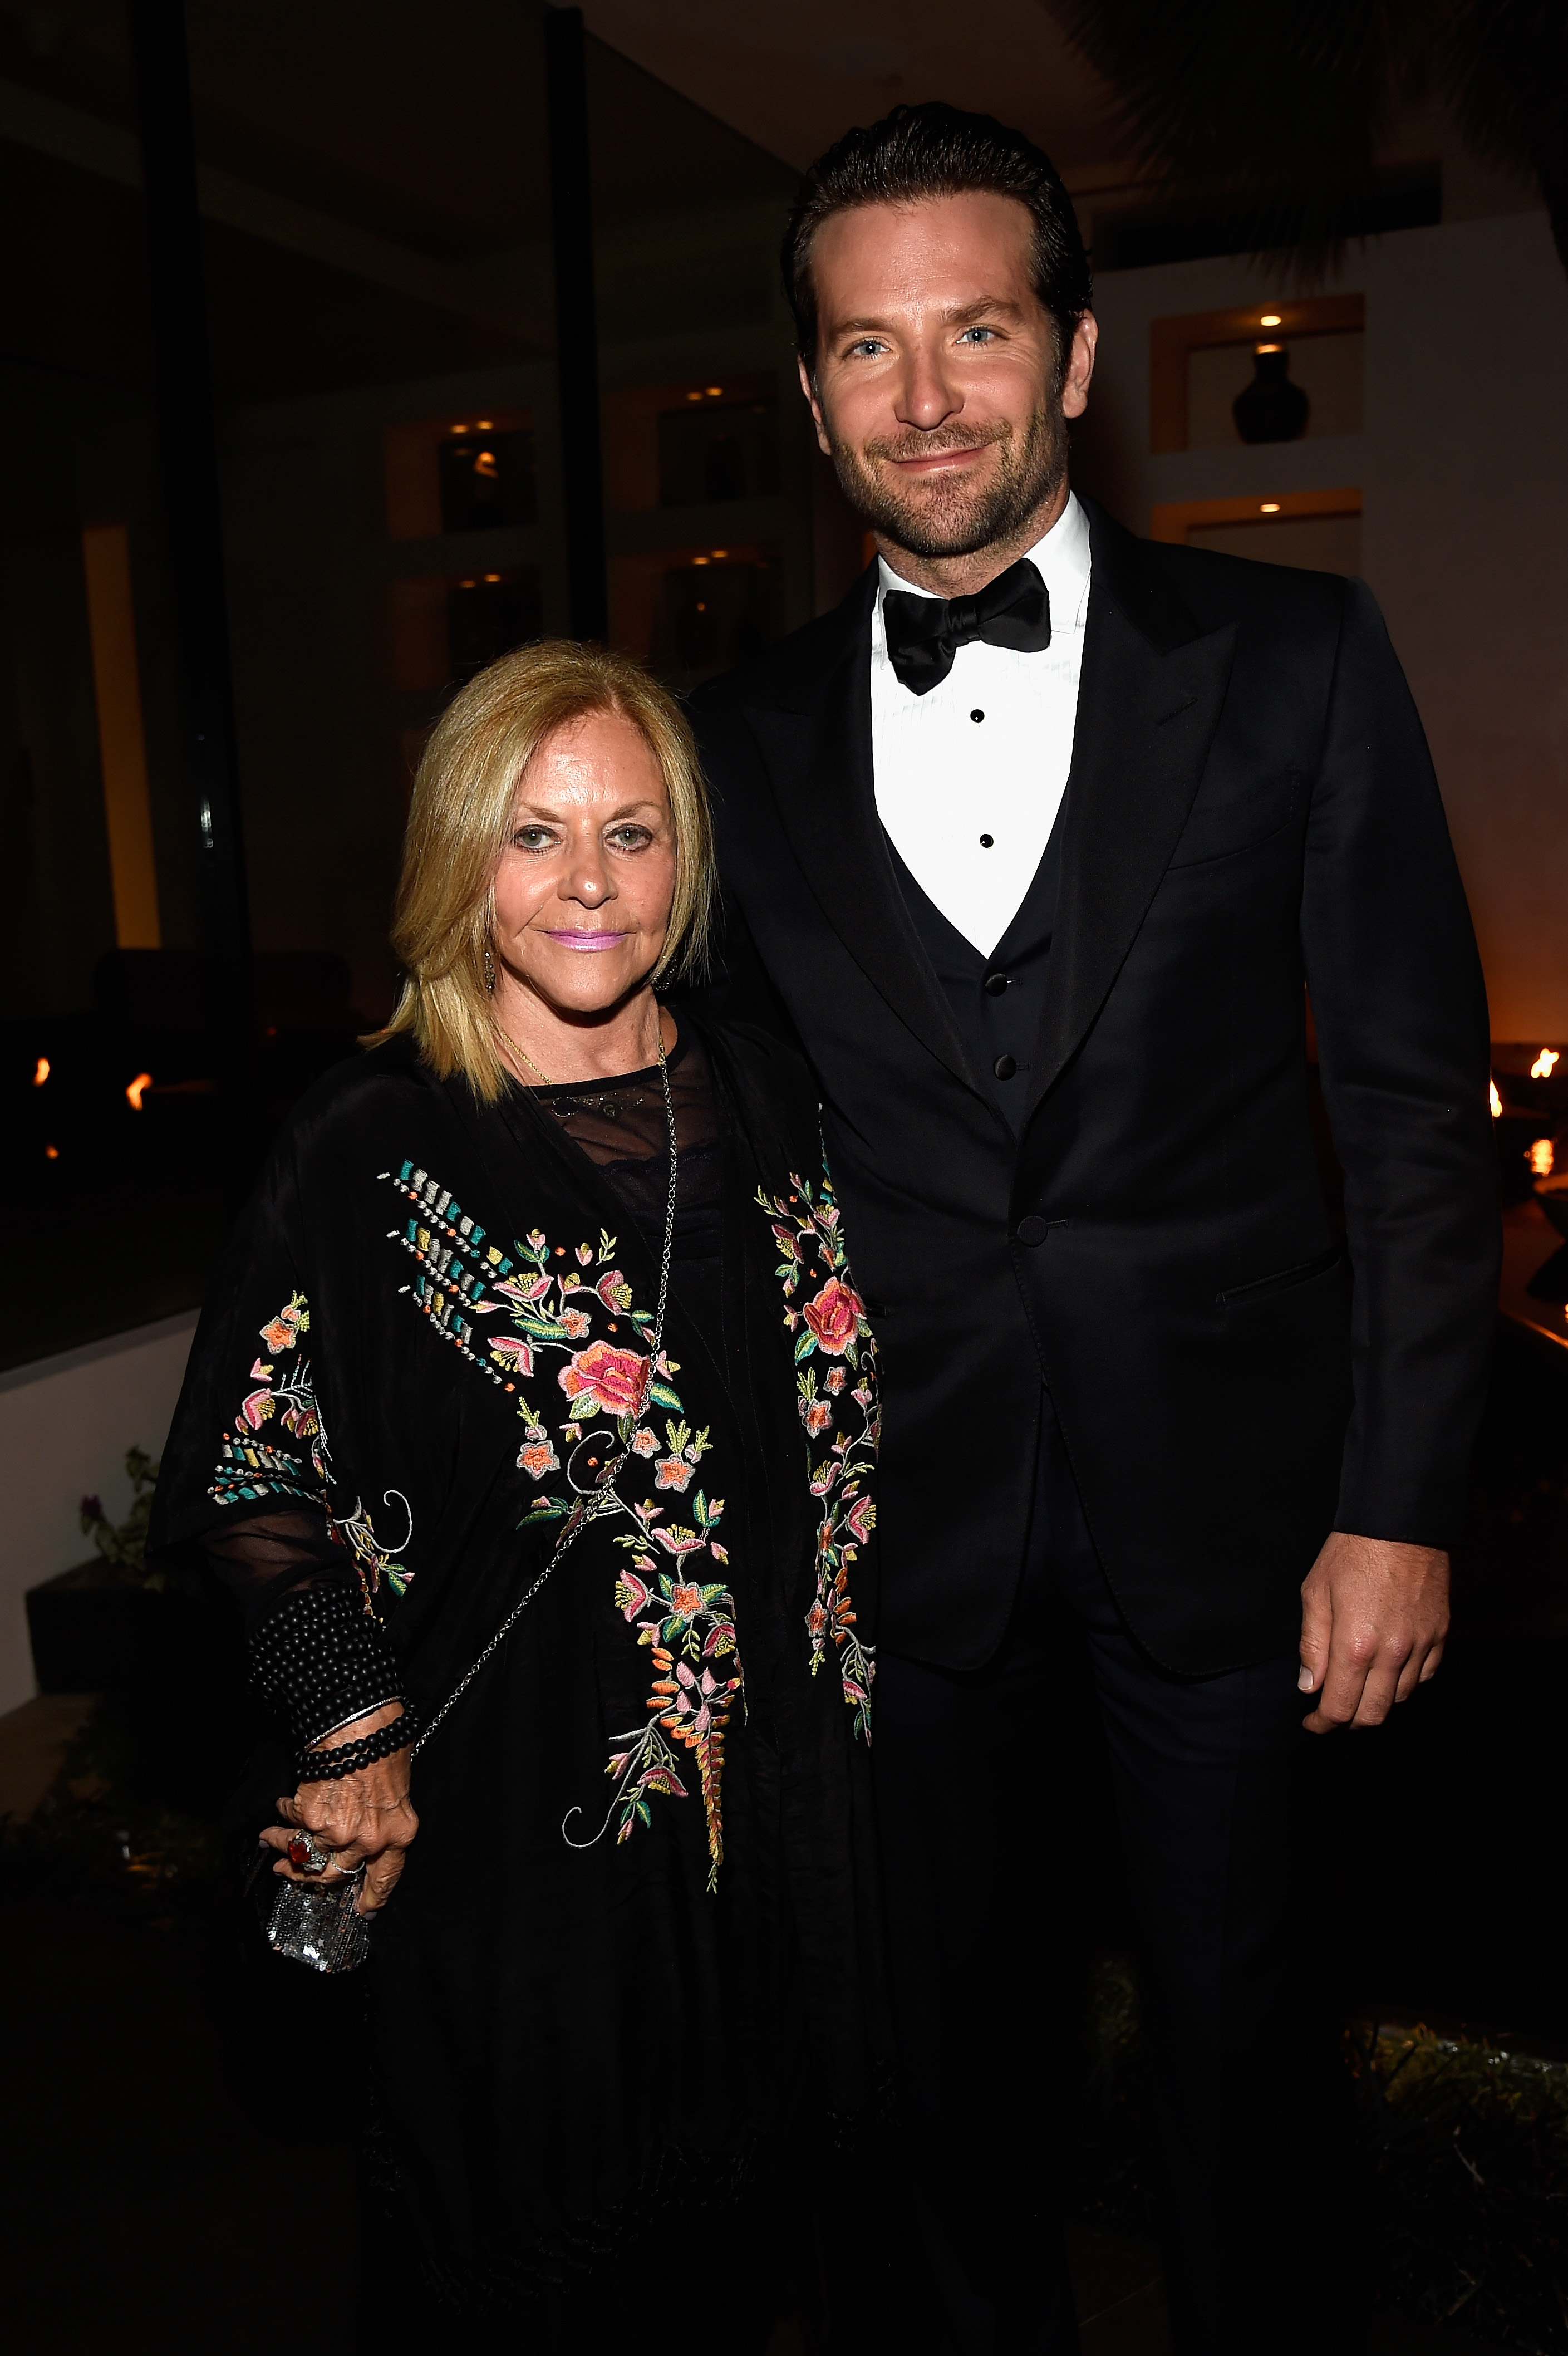 Gloria Campano and Bradley Cooper at the Sean Parker And The Parker Foundation Launch The Parker Institute For Cancer Immunotherapy Gala in 2016 | Source: Getty Images